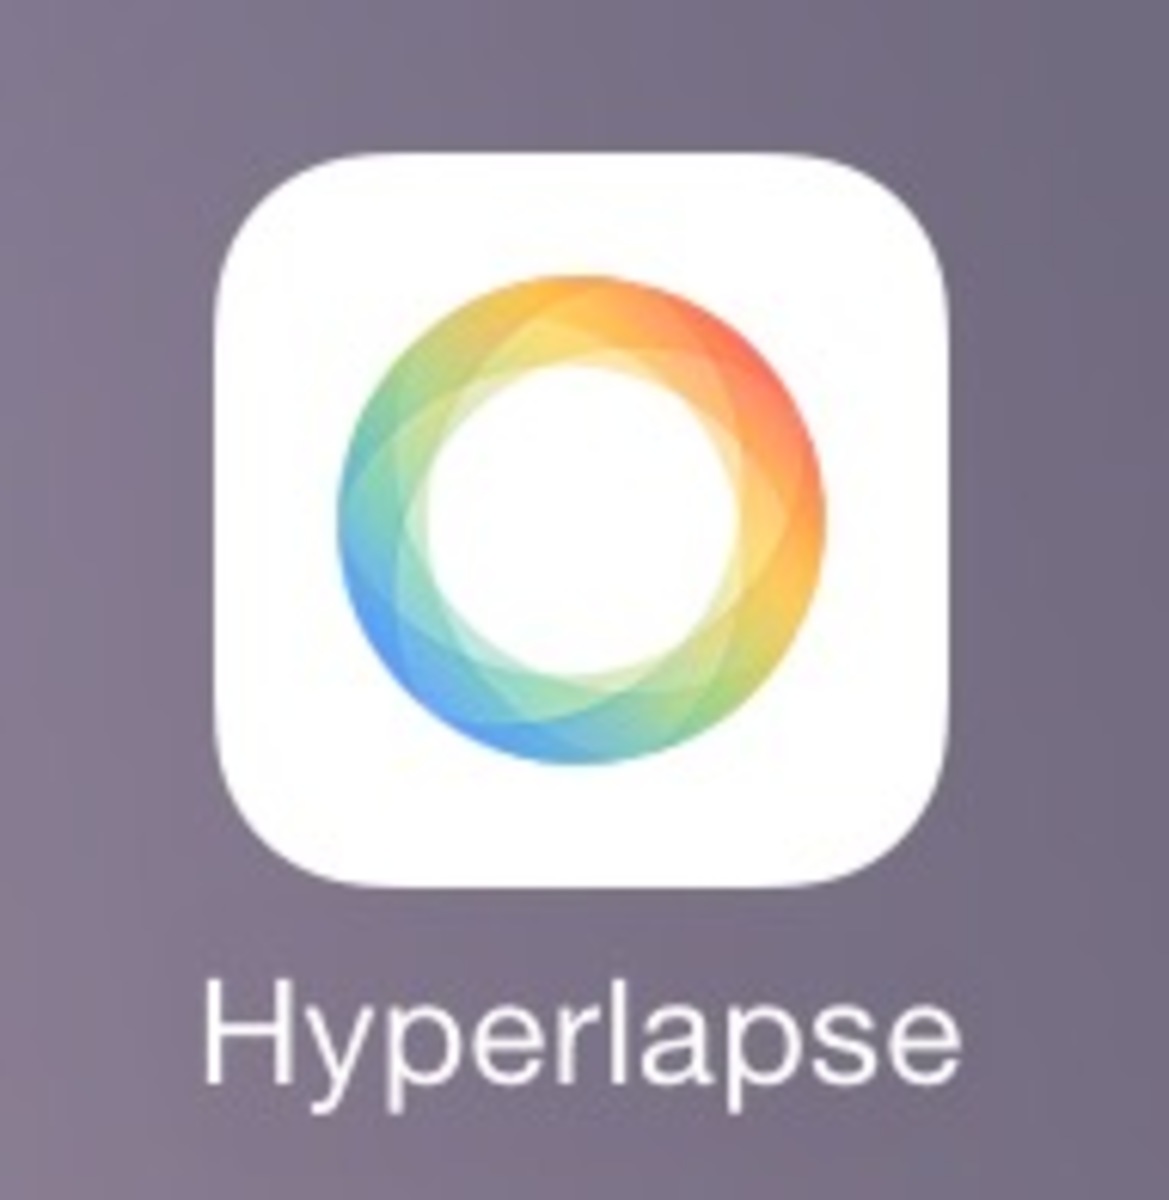 Hyperlapse was Instagram’s second app, released in 2014. Users can speed up video, turning hours of footage into just seconds. Similar to Layout, the video can be directly uploaded to Instagram using the app. (PHOTO BY JACK LOON)